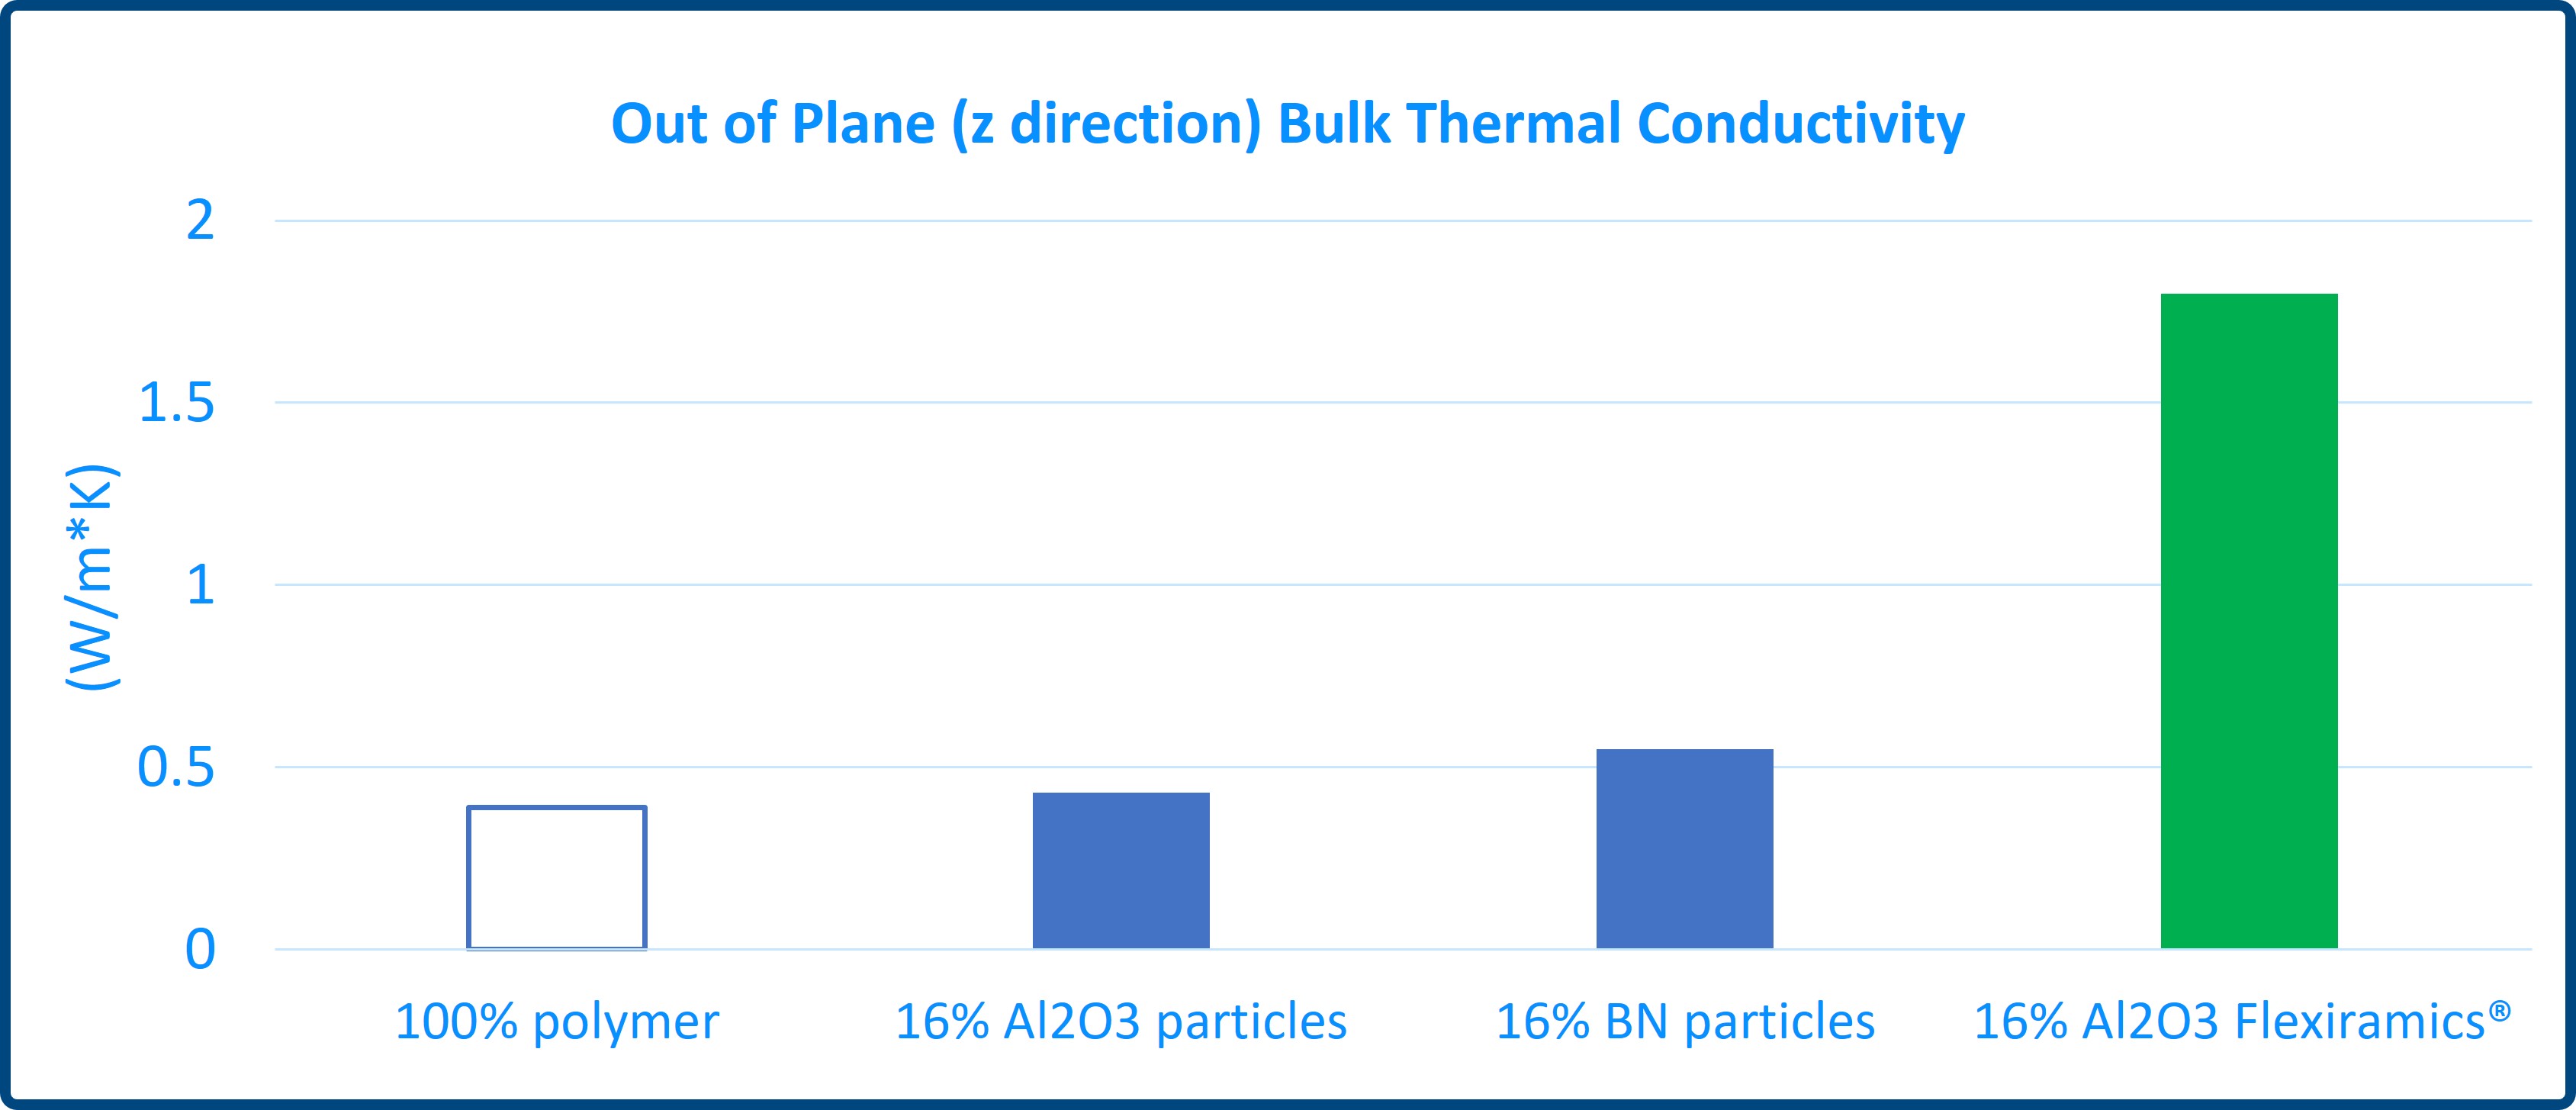 Flexiramics-E thin film products have reached a bulk thermal conductivity of 1.8 W/mK in the Z-direction